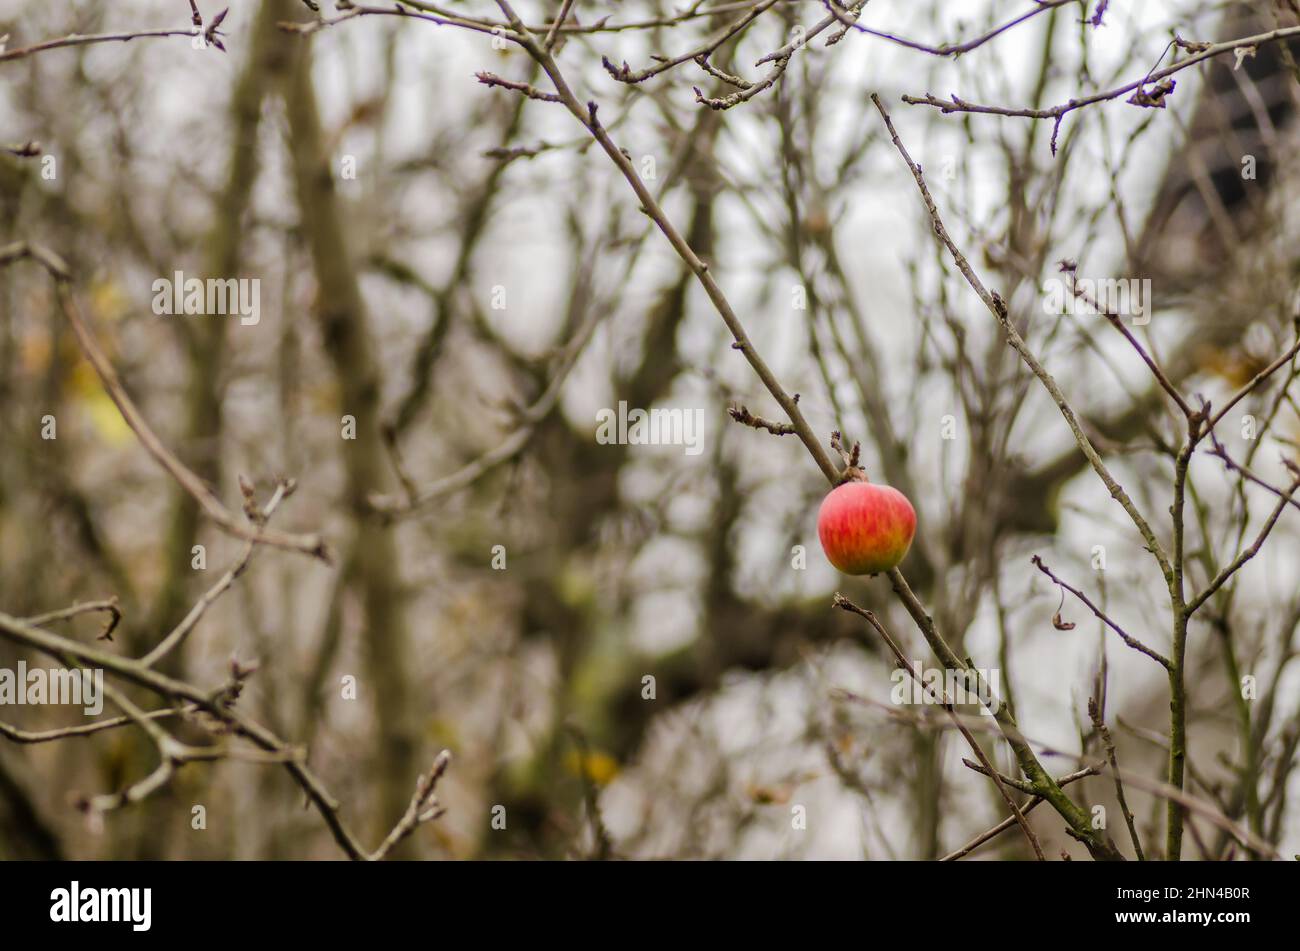 Square image of one apple on a twig of an apple tree. Stock Photo